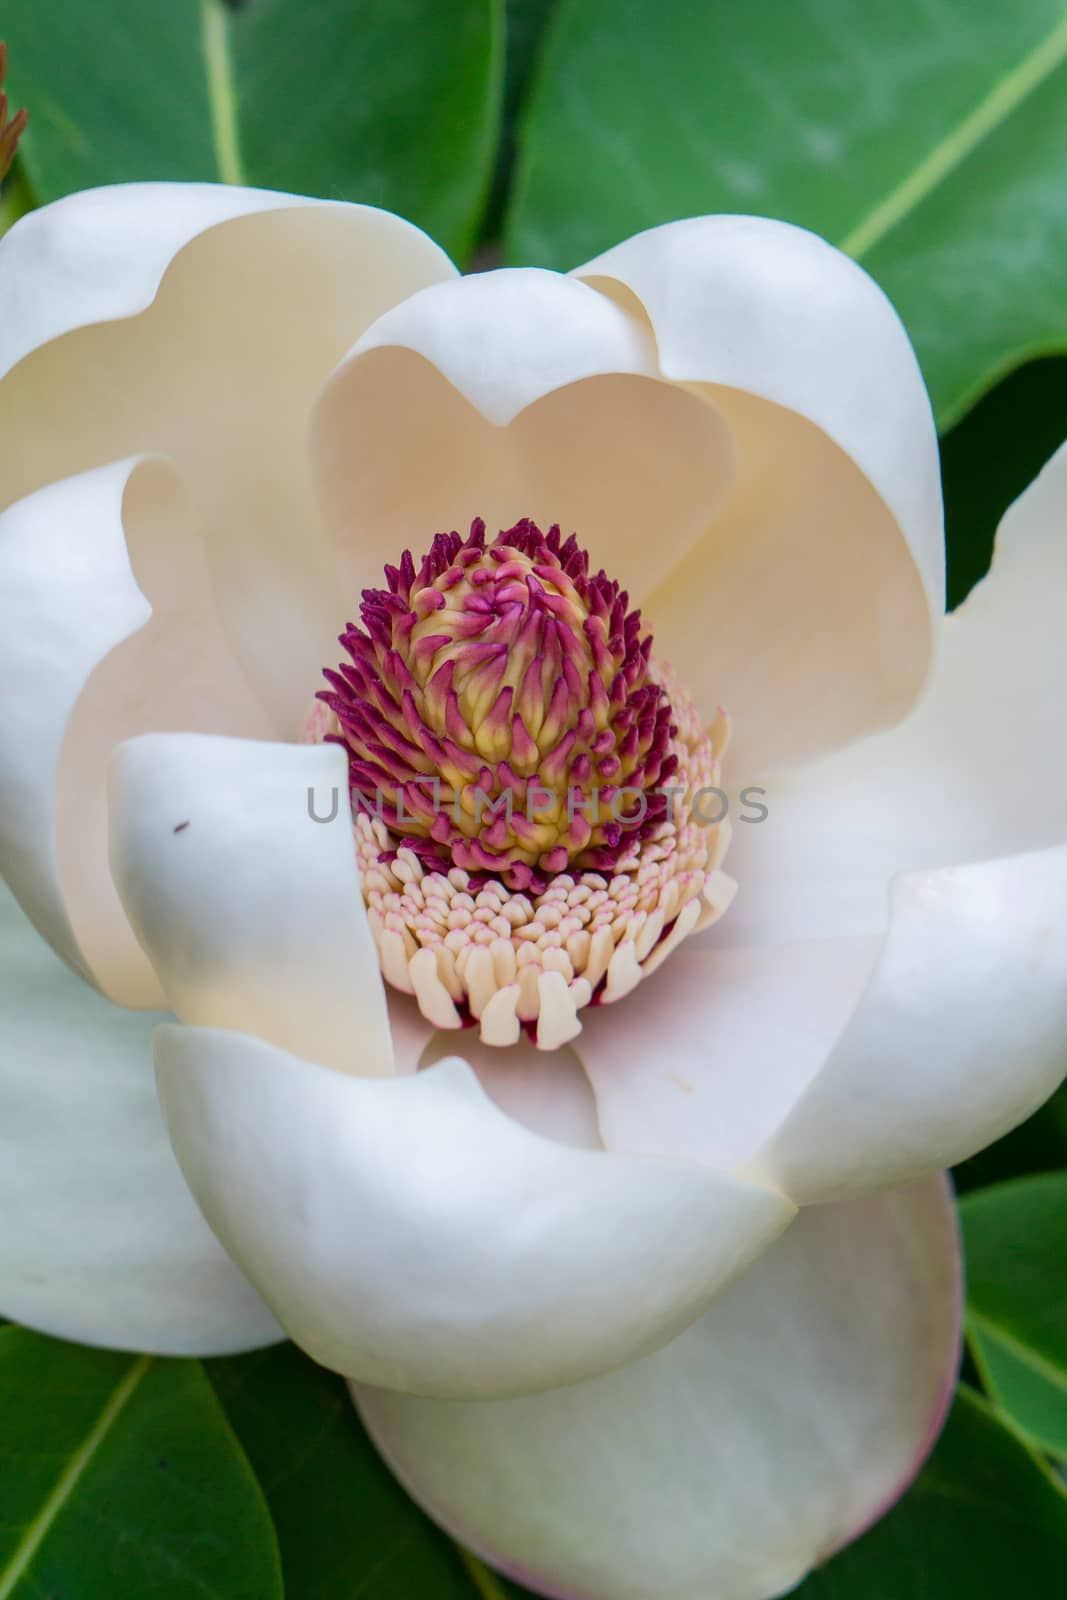 Flower of a water lily with white petals and green leaves. Photo of the close